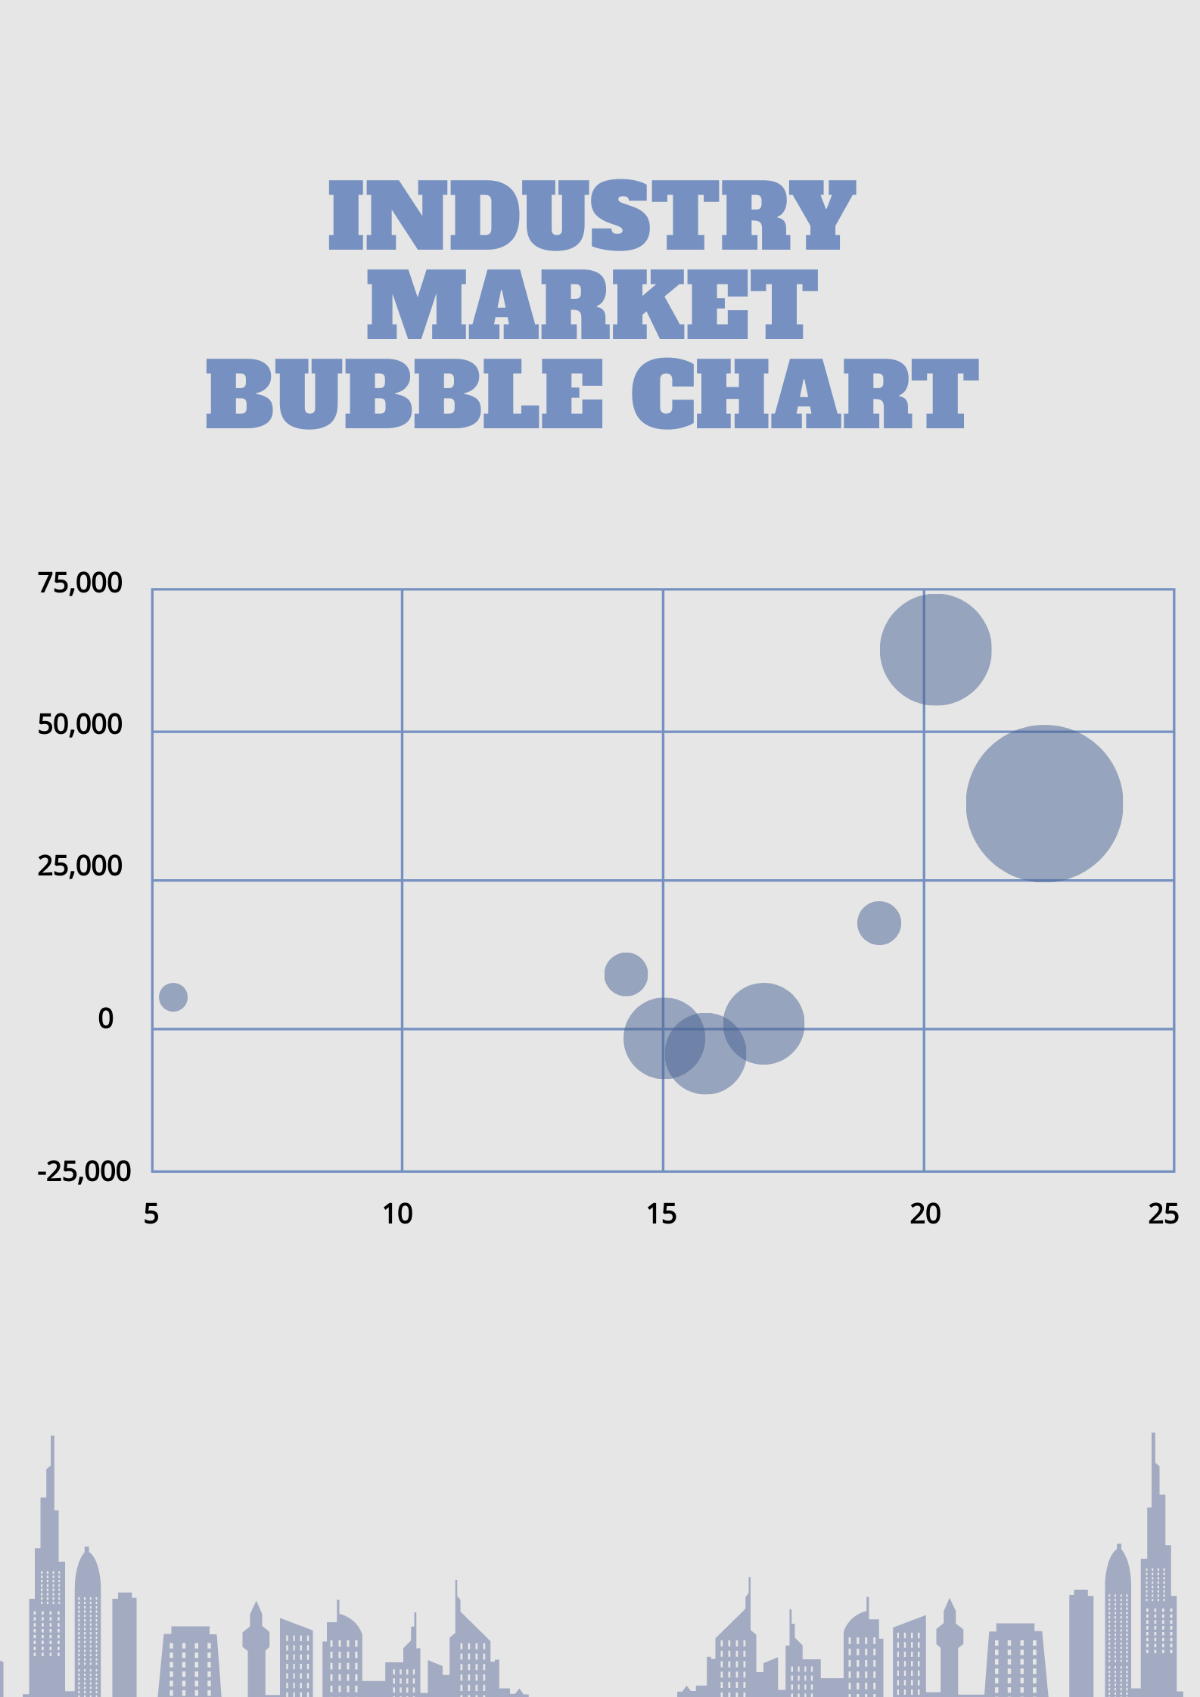 Industry Market Share Bubble Chart